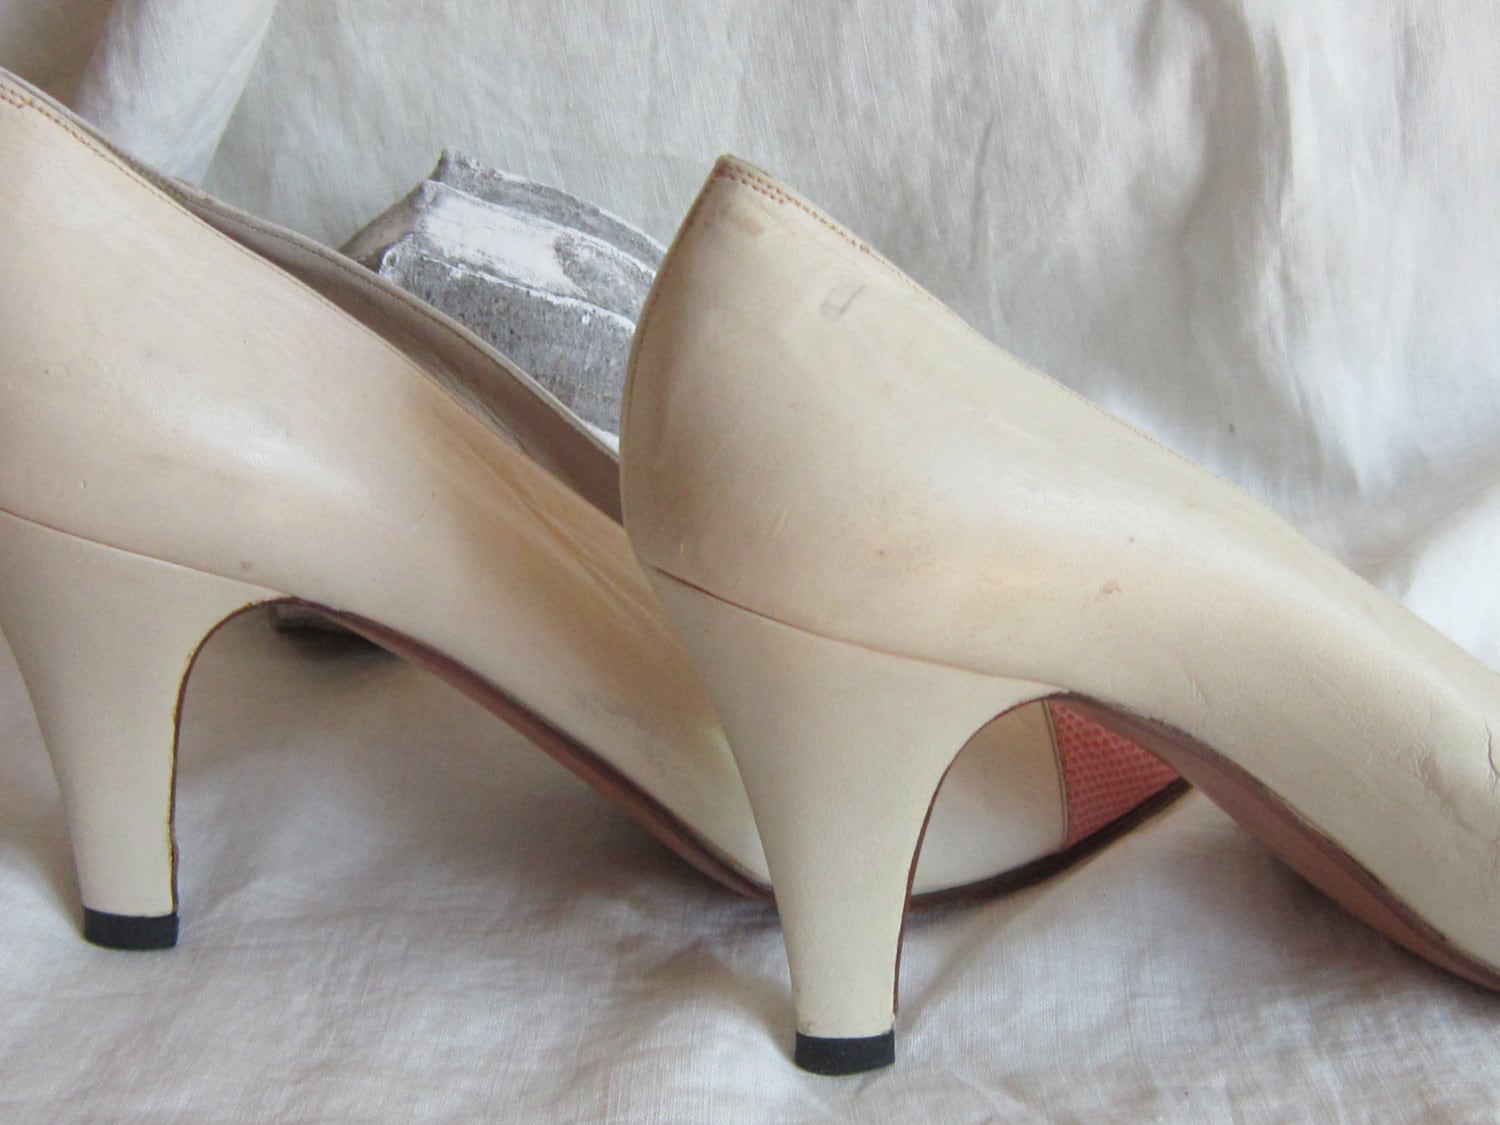 Vintage CHANEL Pumps by PastAccoutrements on Etsy